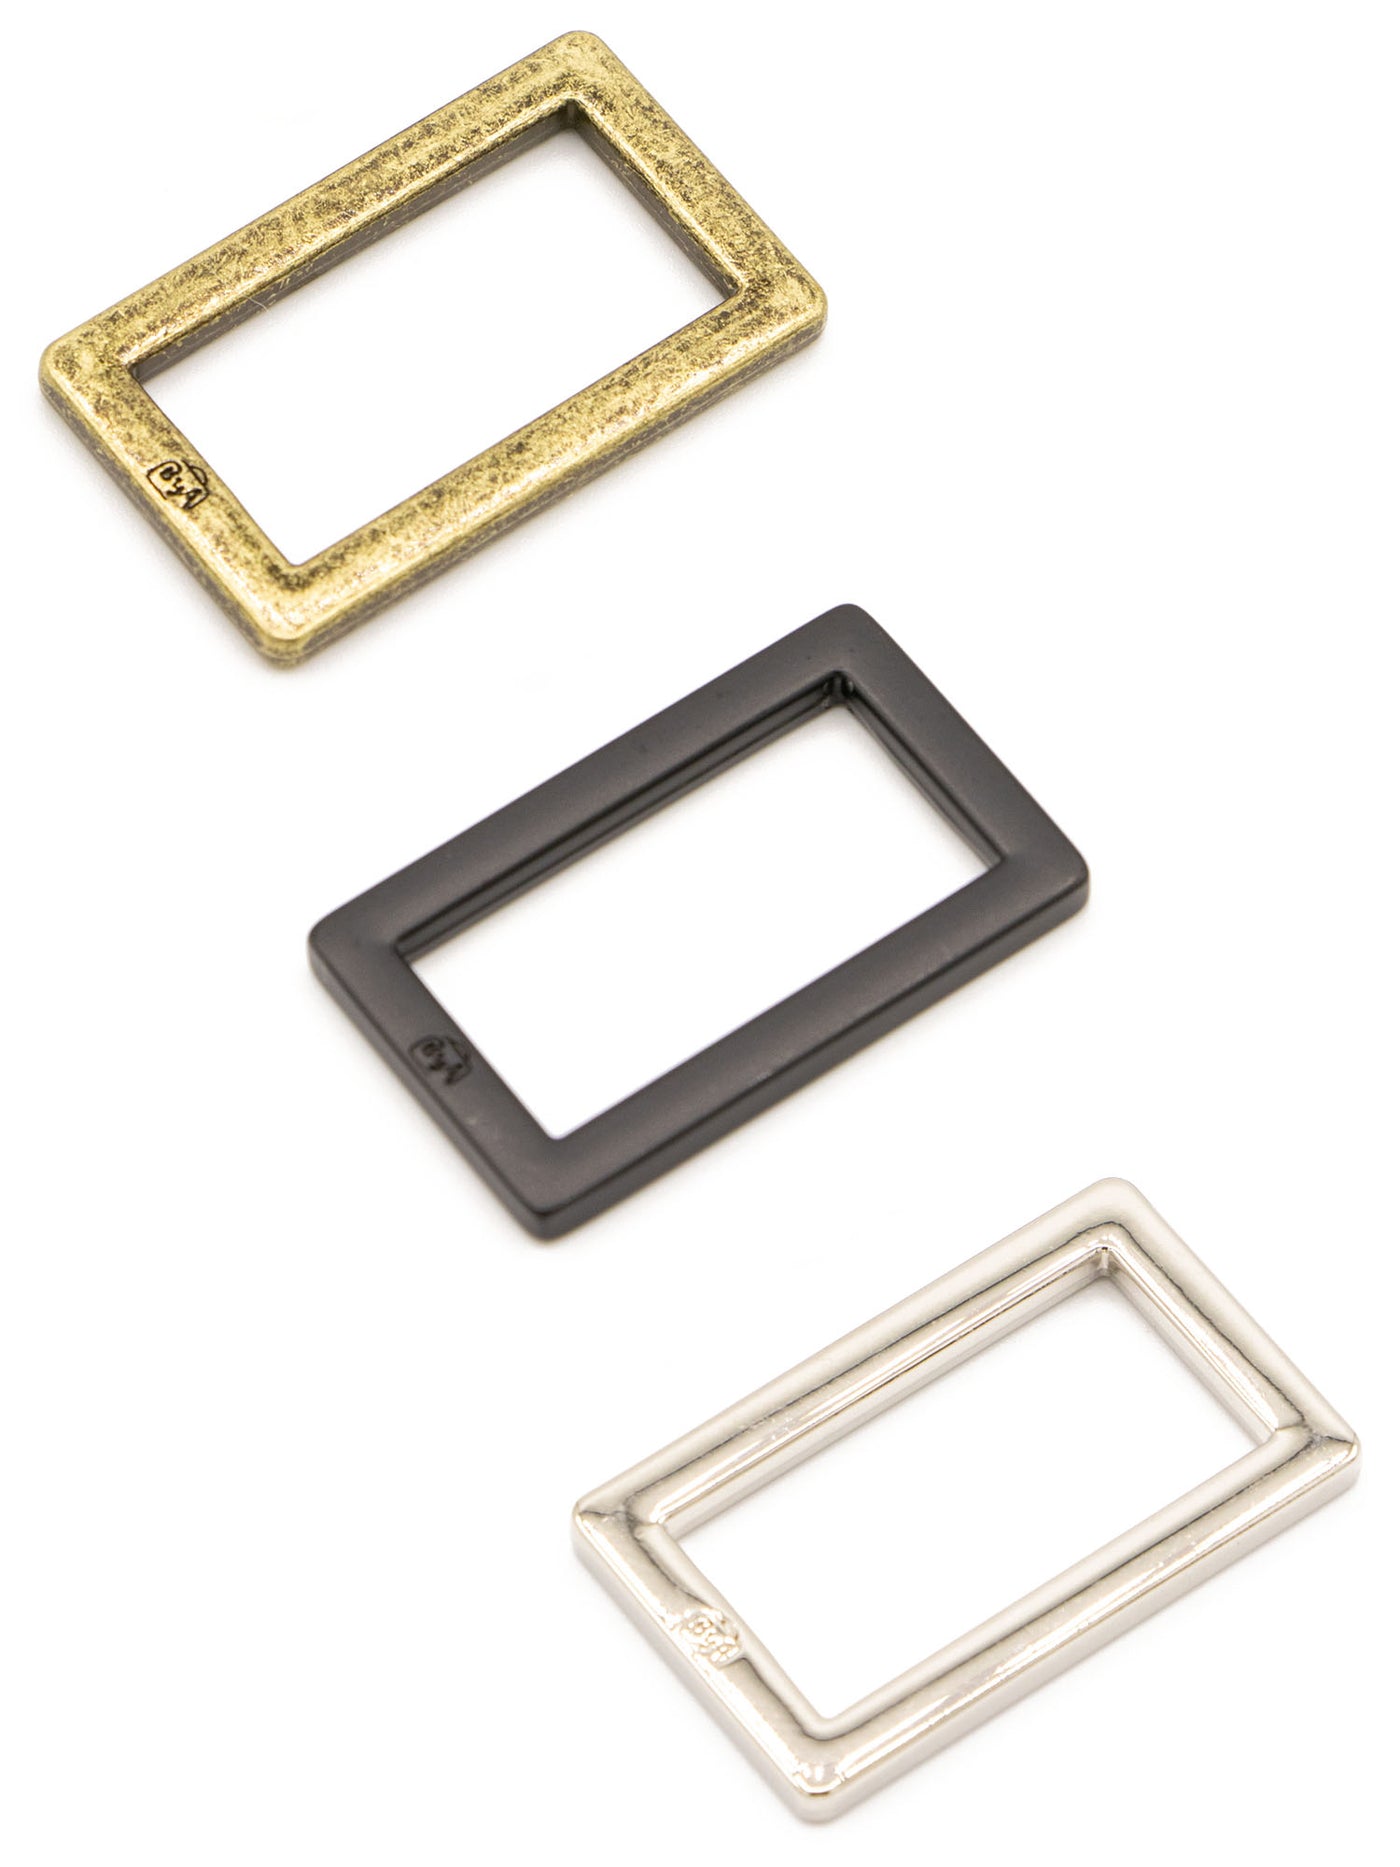 1" Rectangle Ring - Set of 2